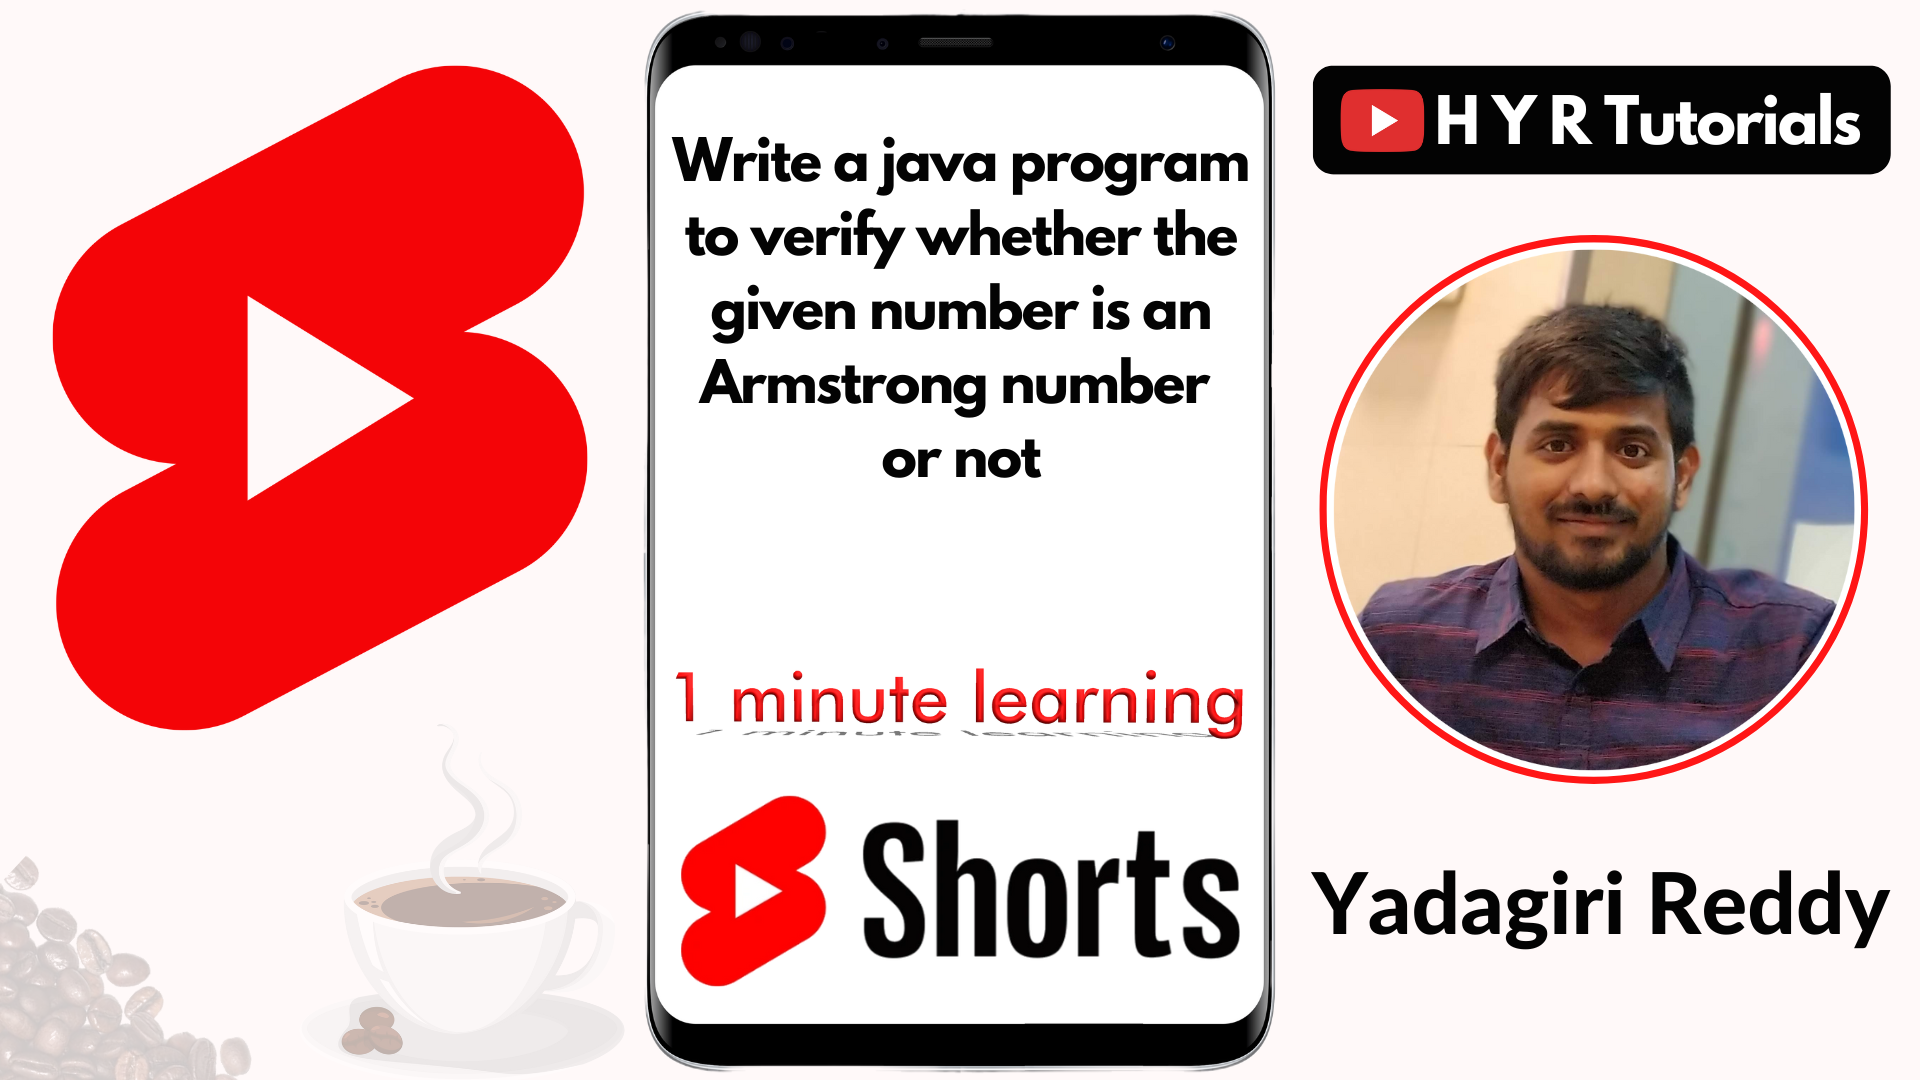 Write a java program to verify whether the given number is an Armstrong number or not